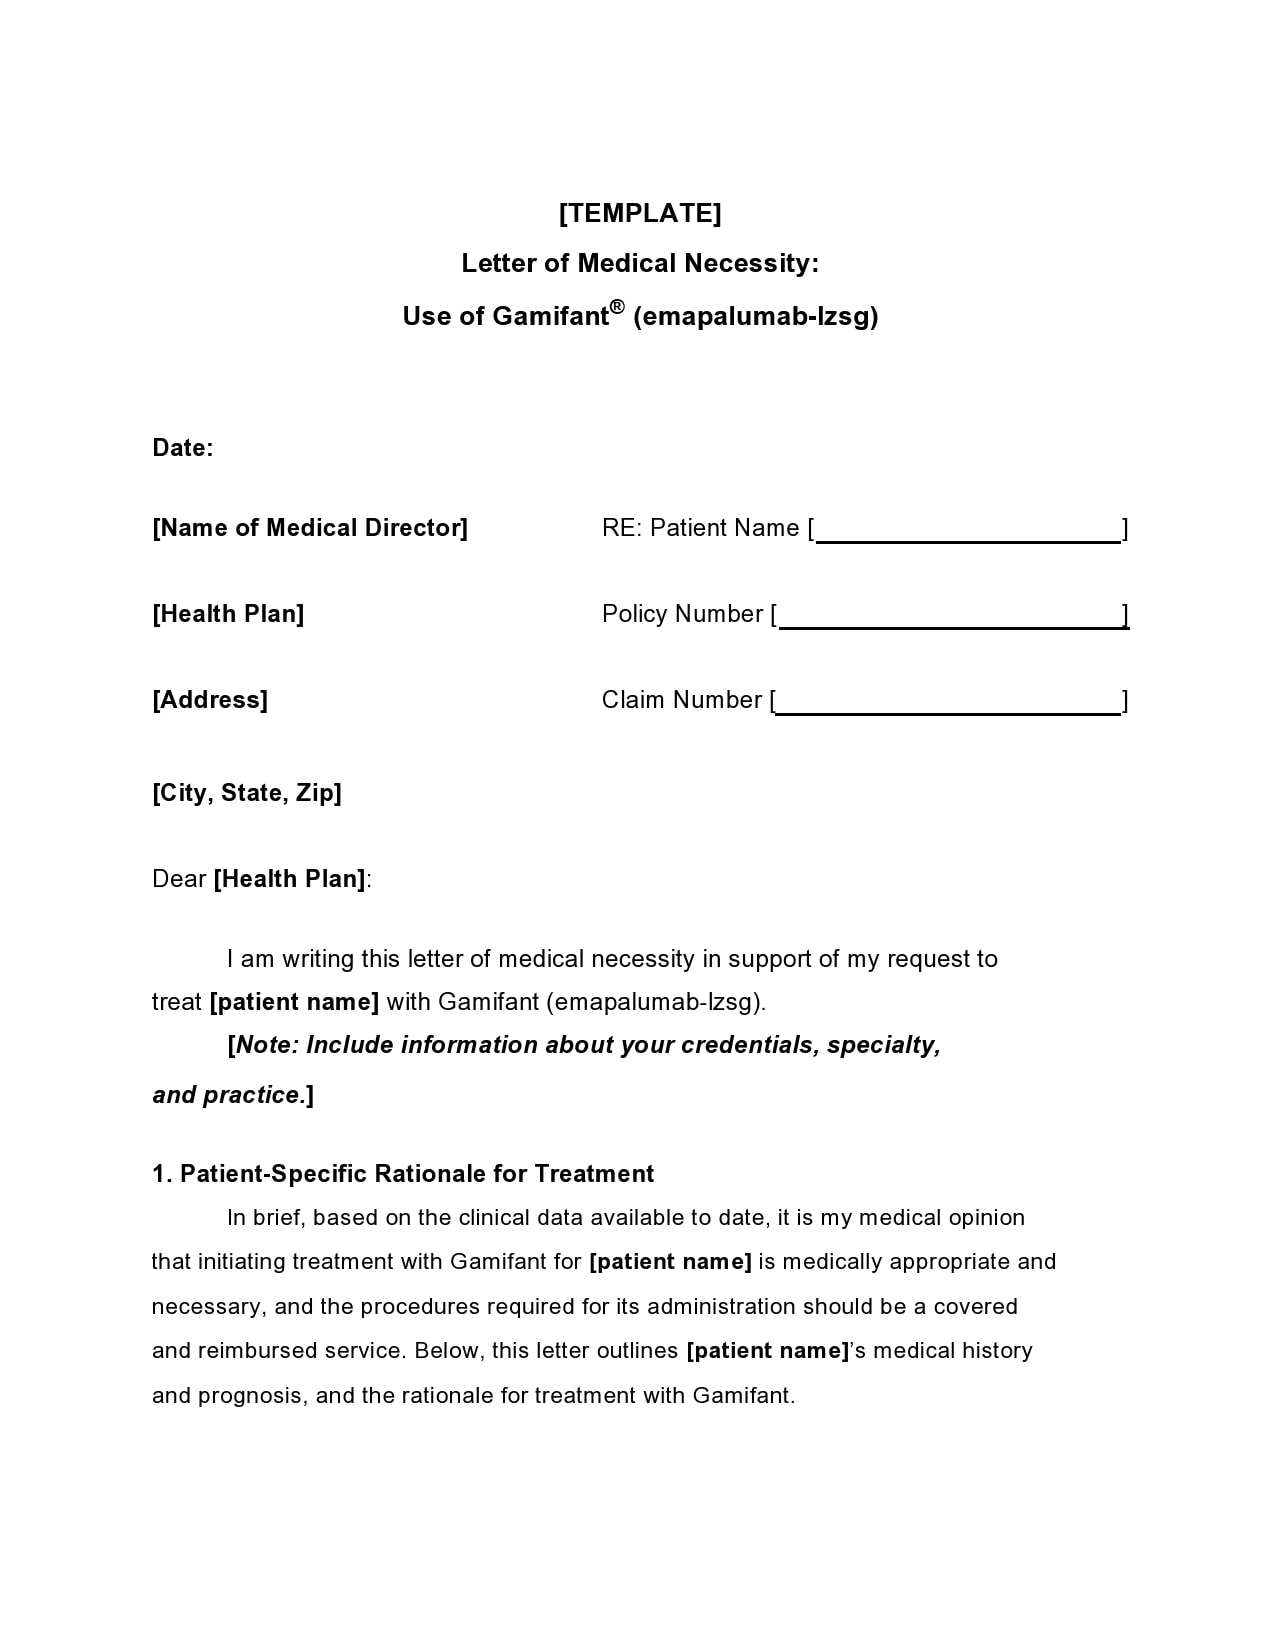 40 Best Letter Of Medical Necessity Templates And Examples 3367